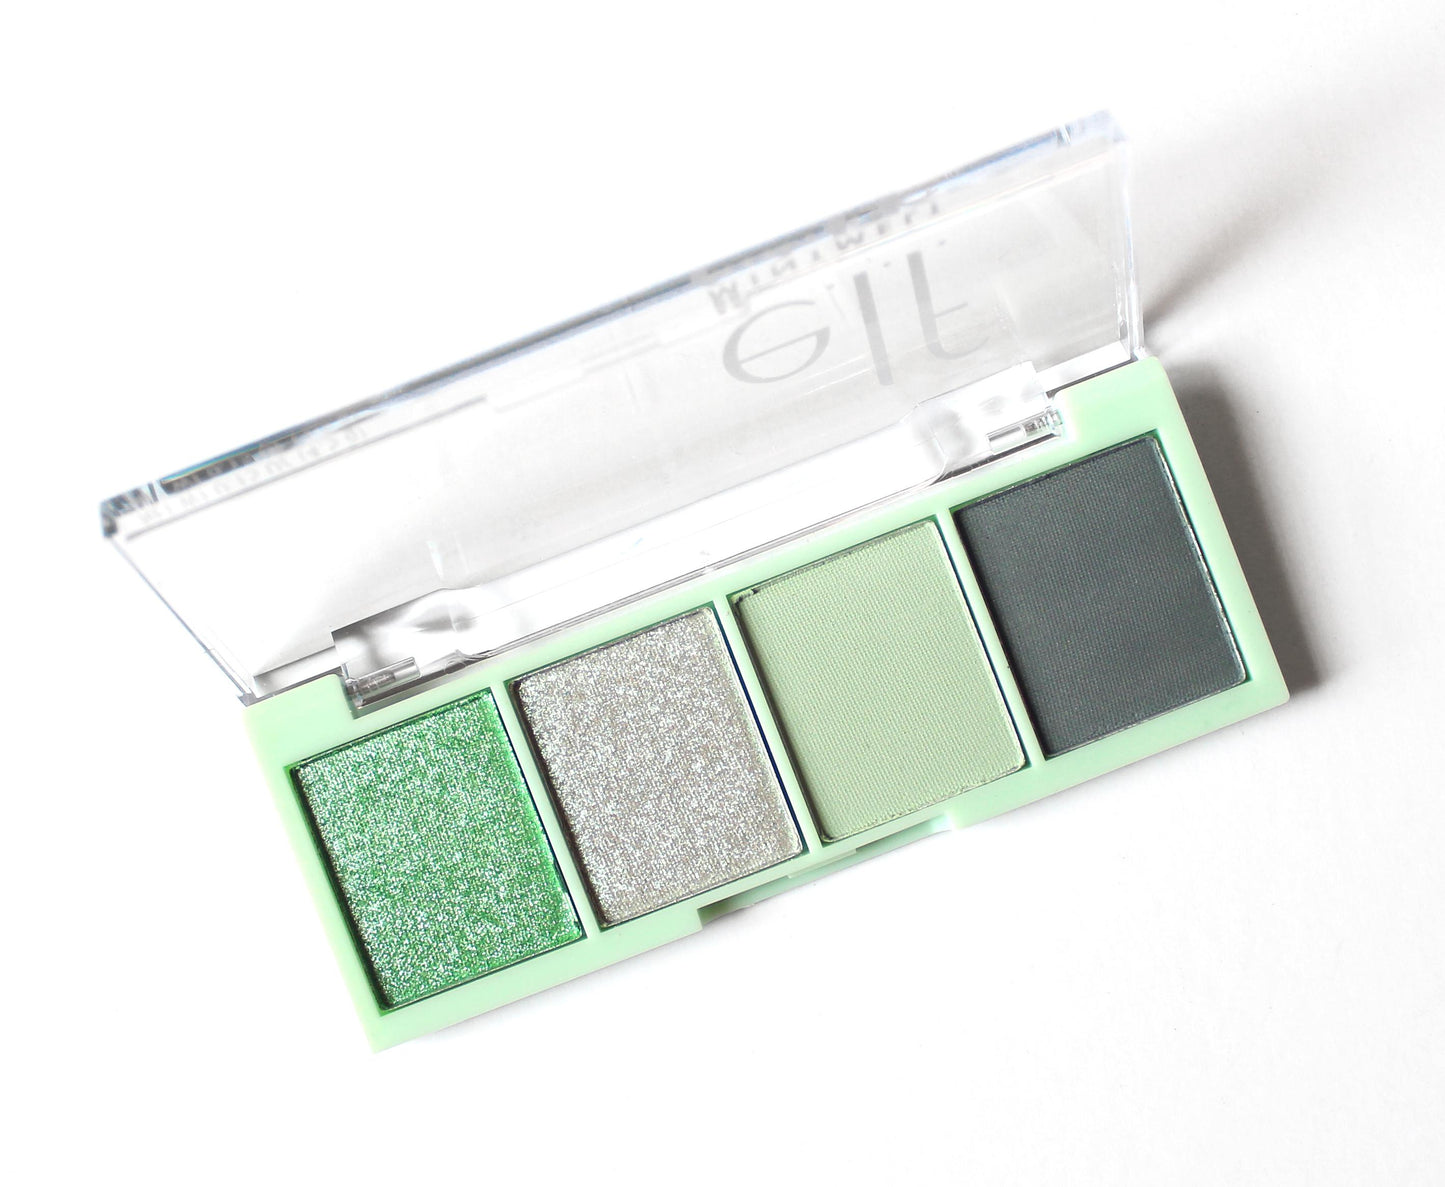 BITE SIZE EYESHADOW - MINT TO BE